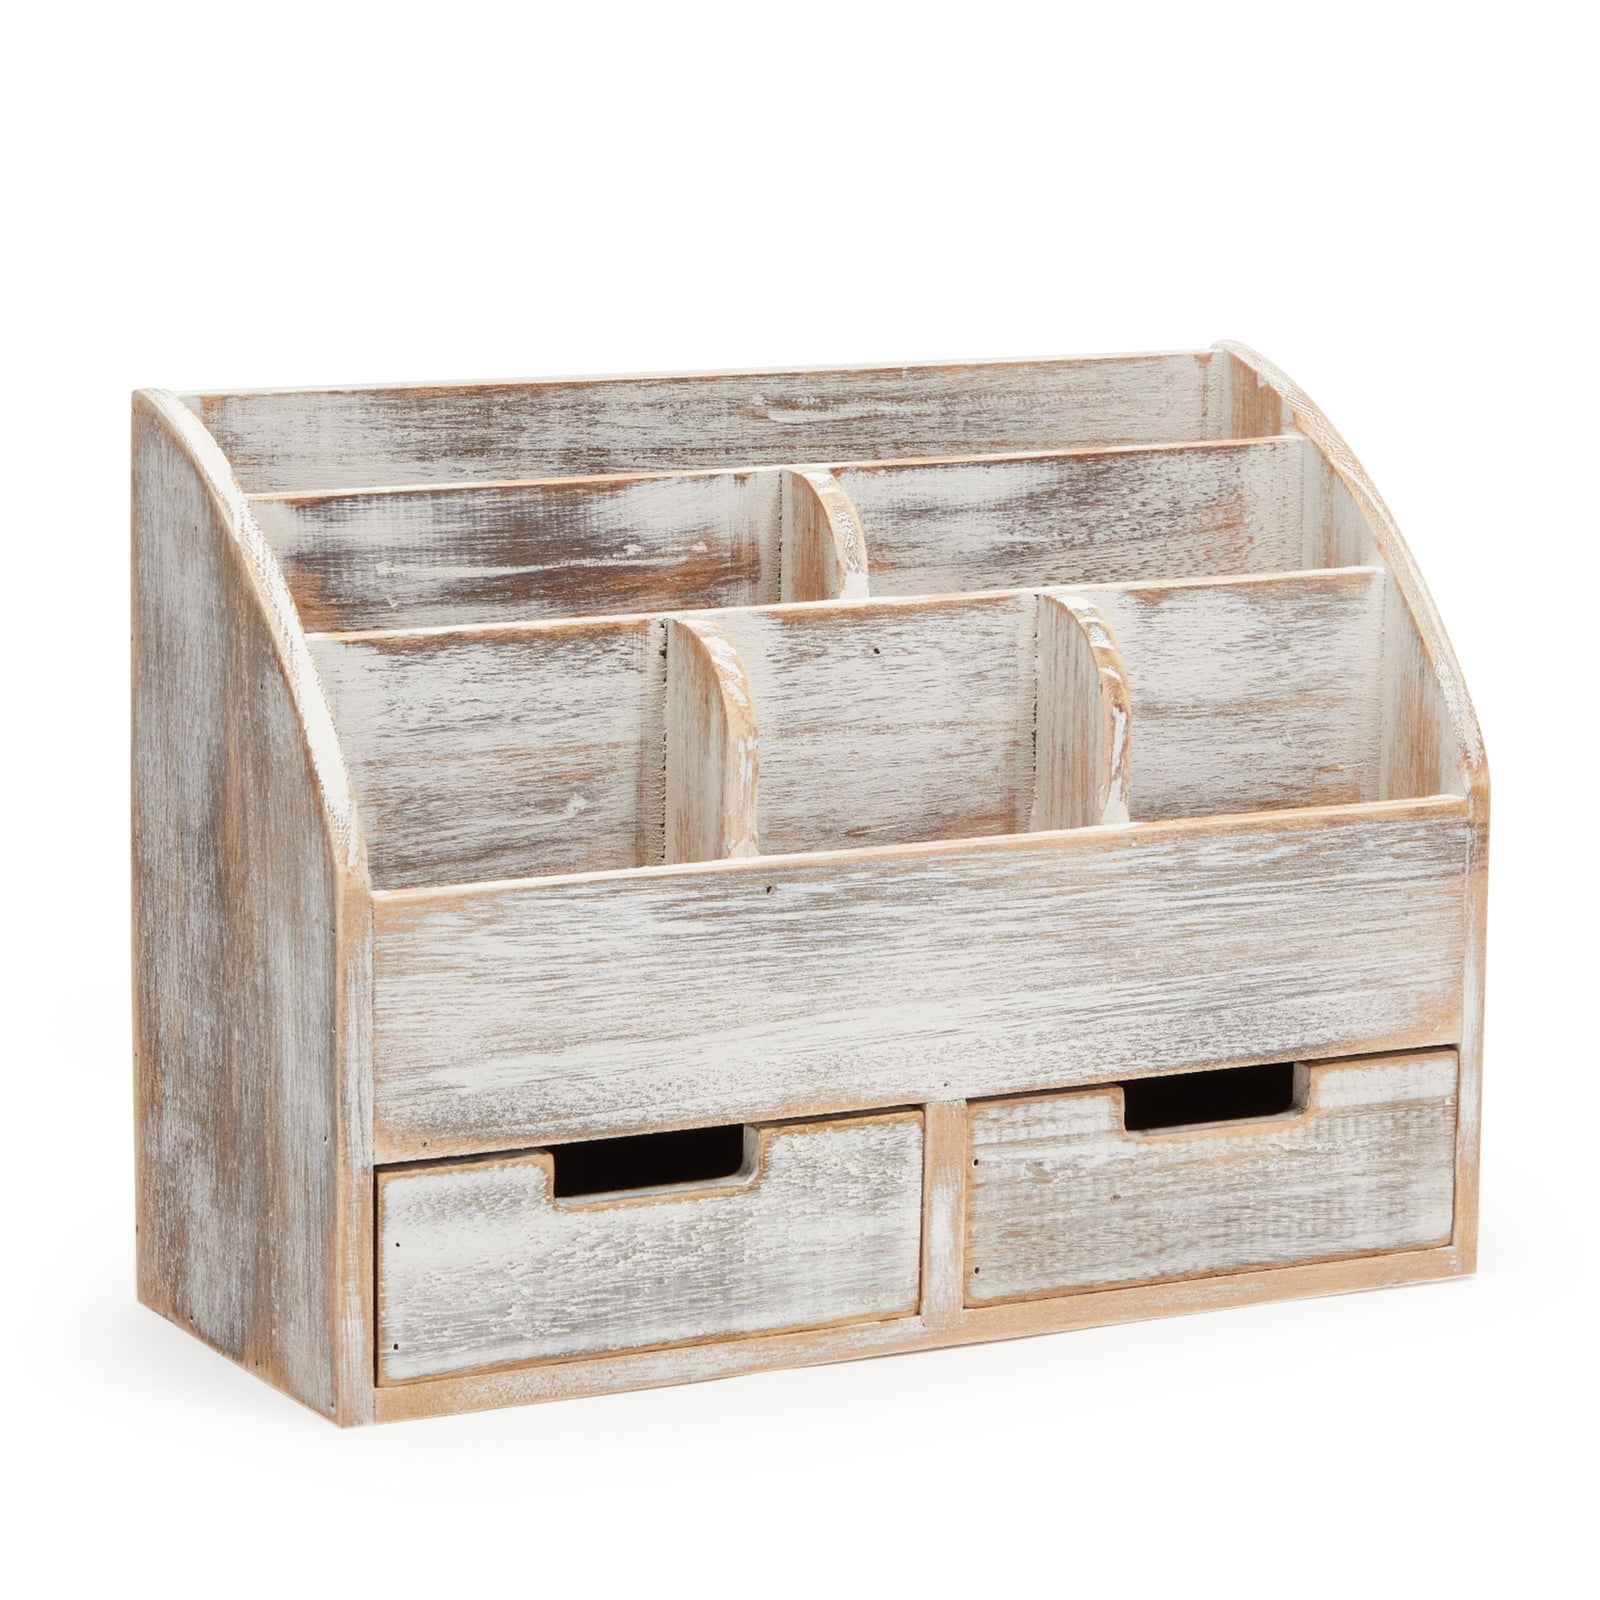 Klap eindpunt kompas Rustic Wood Desk Organizer with Drawers for Home and Office Supplies  Storage, Vintage-Style, 14.5 x 10 x 6 in - Walmart.com